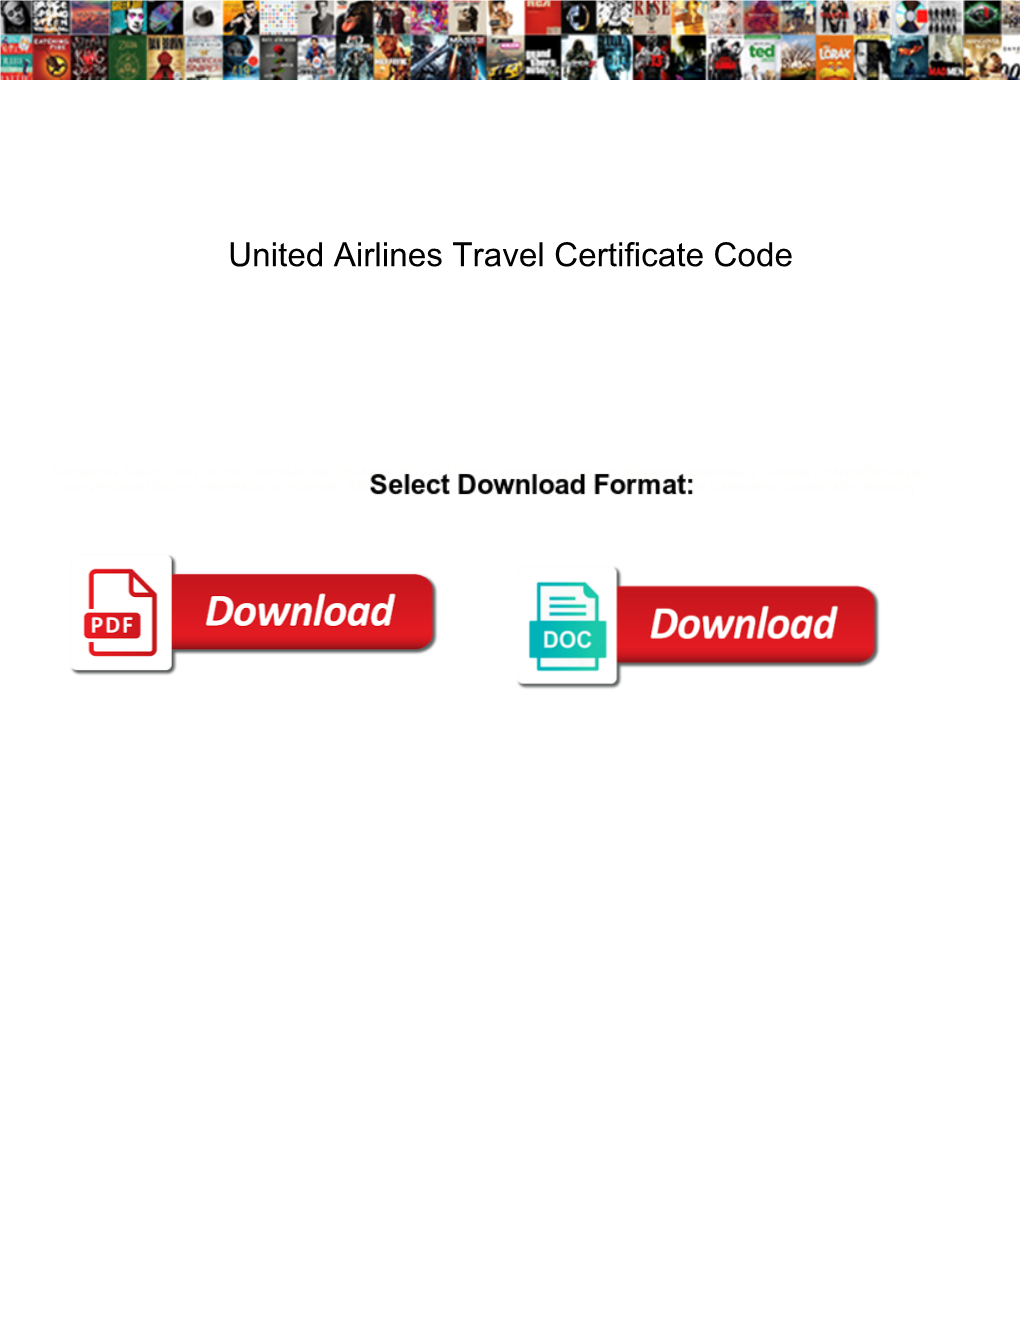 United Airlines Travel Certificate Code